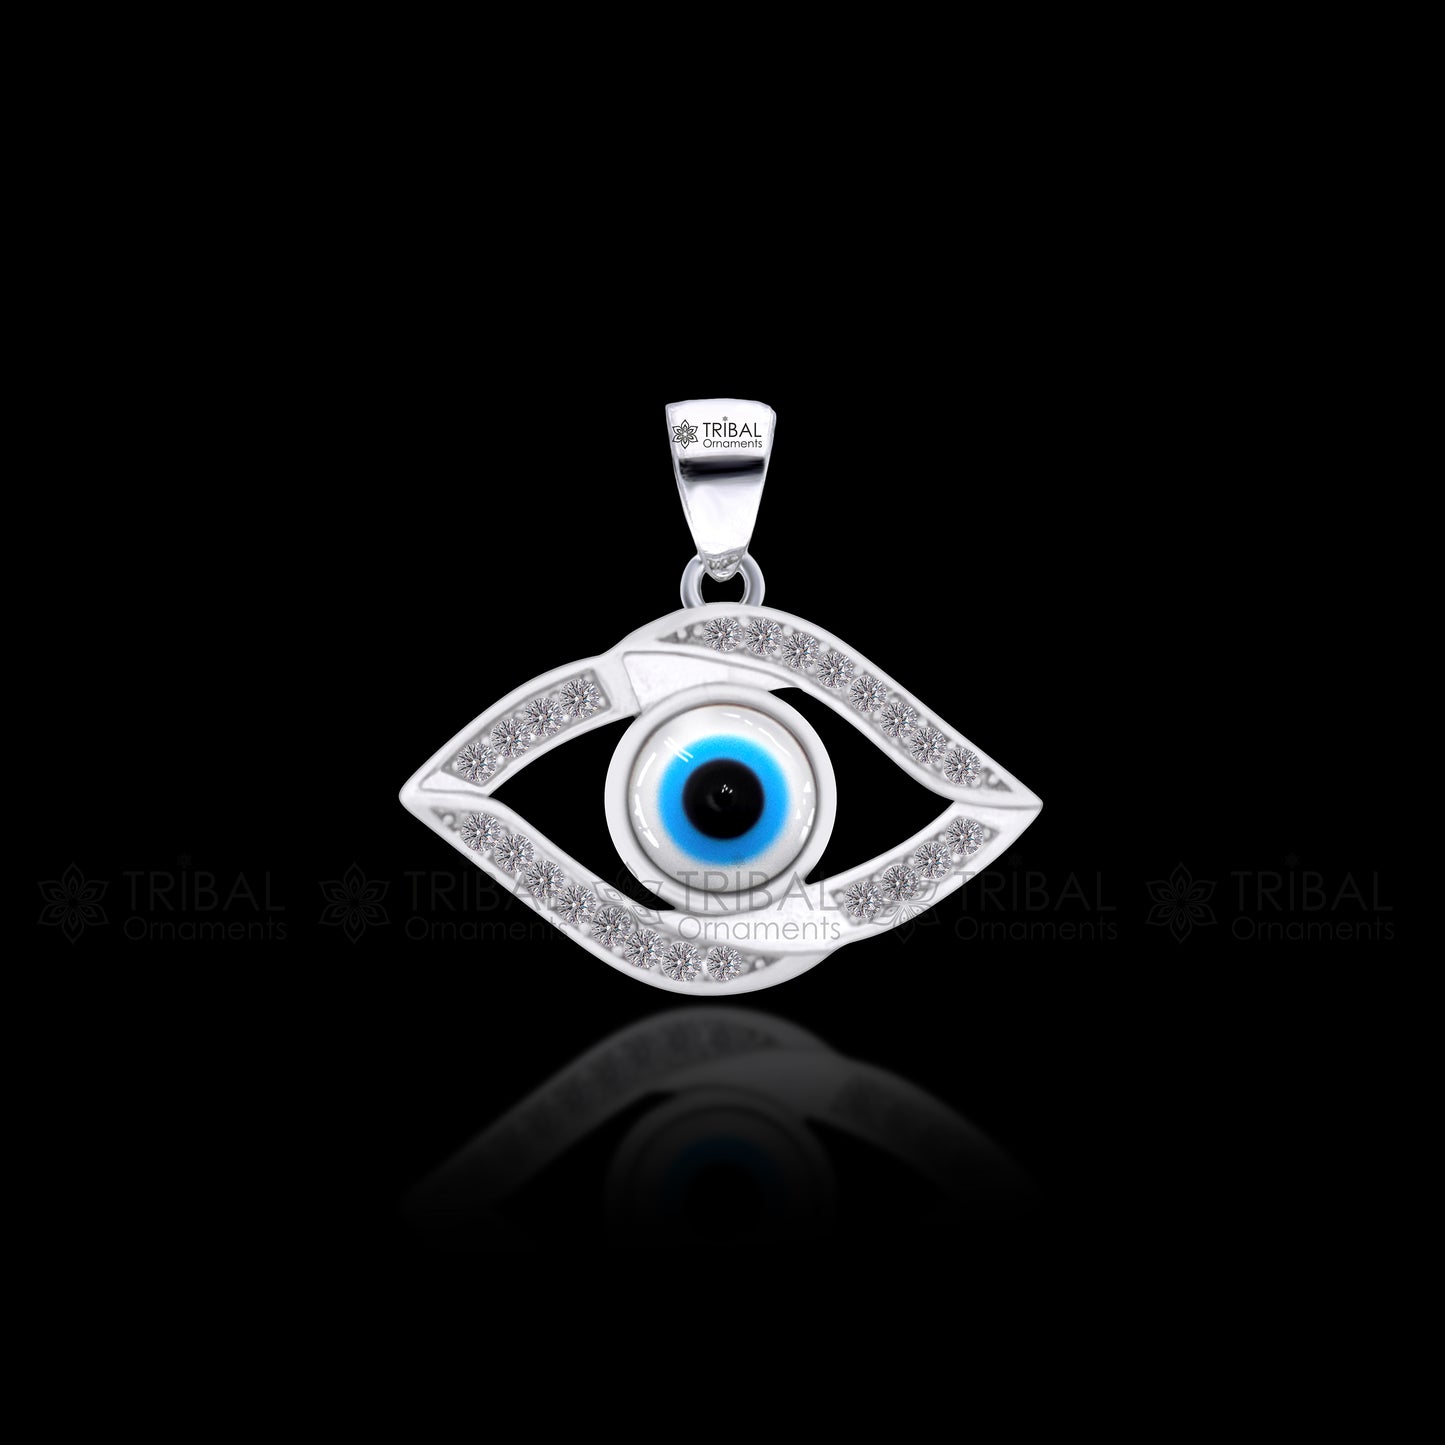 PURE 925 sterling silver evil eyes pendant with CZ stone nsp797